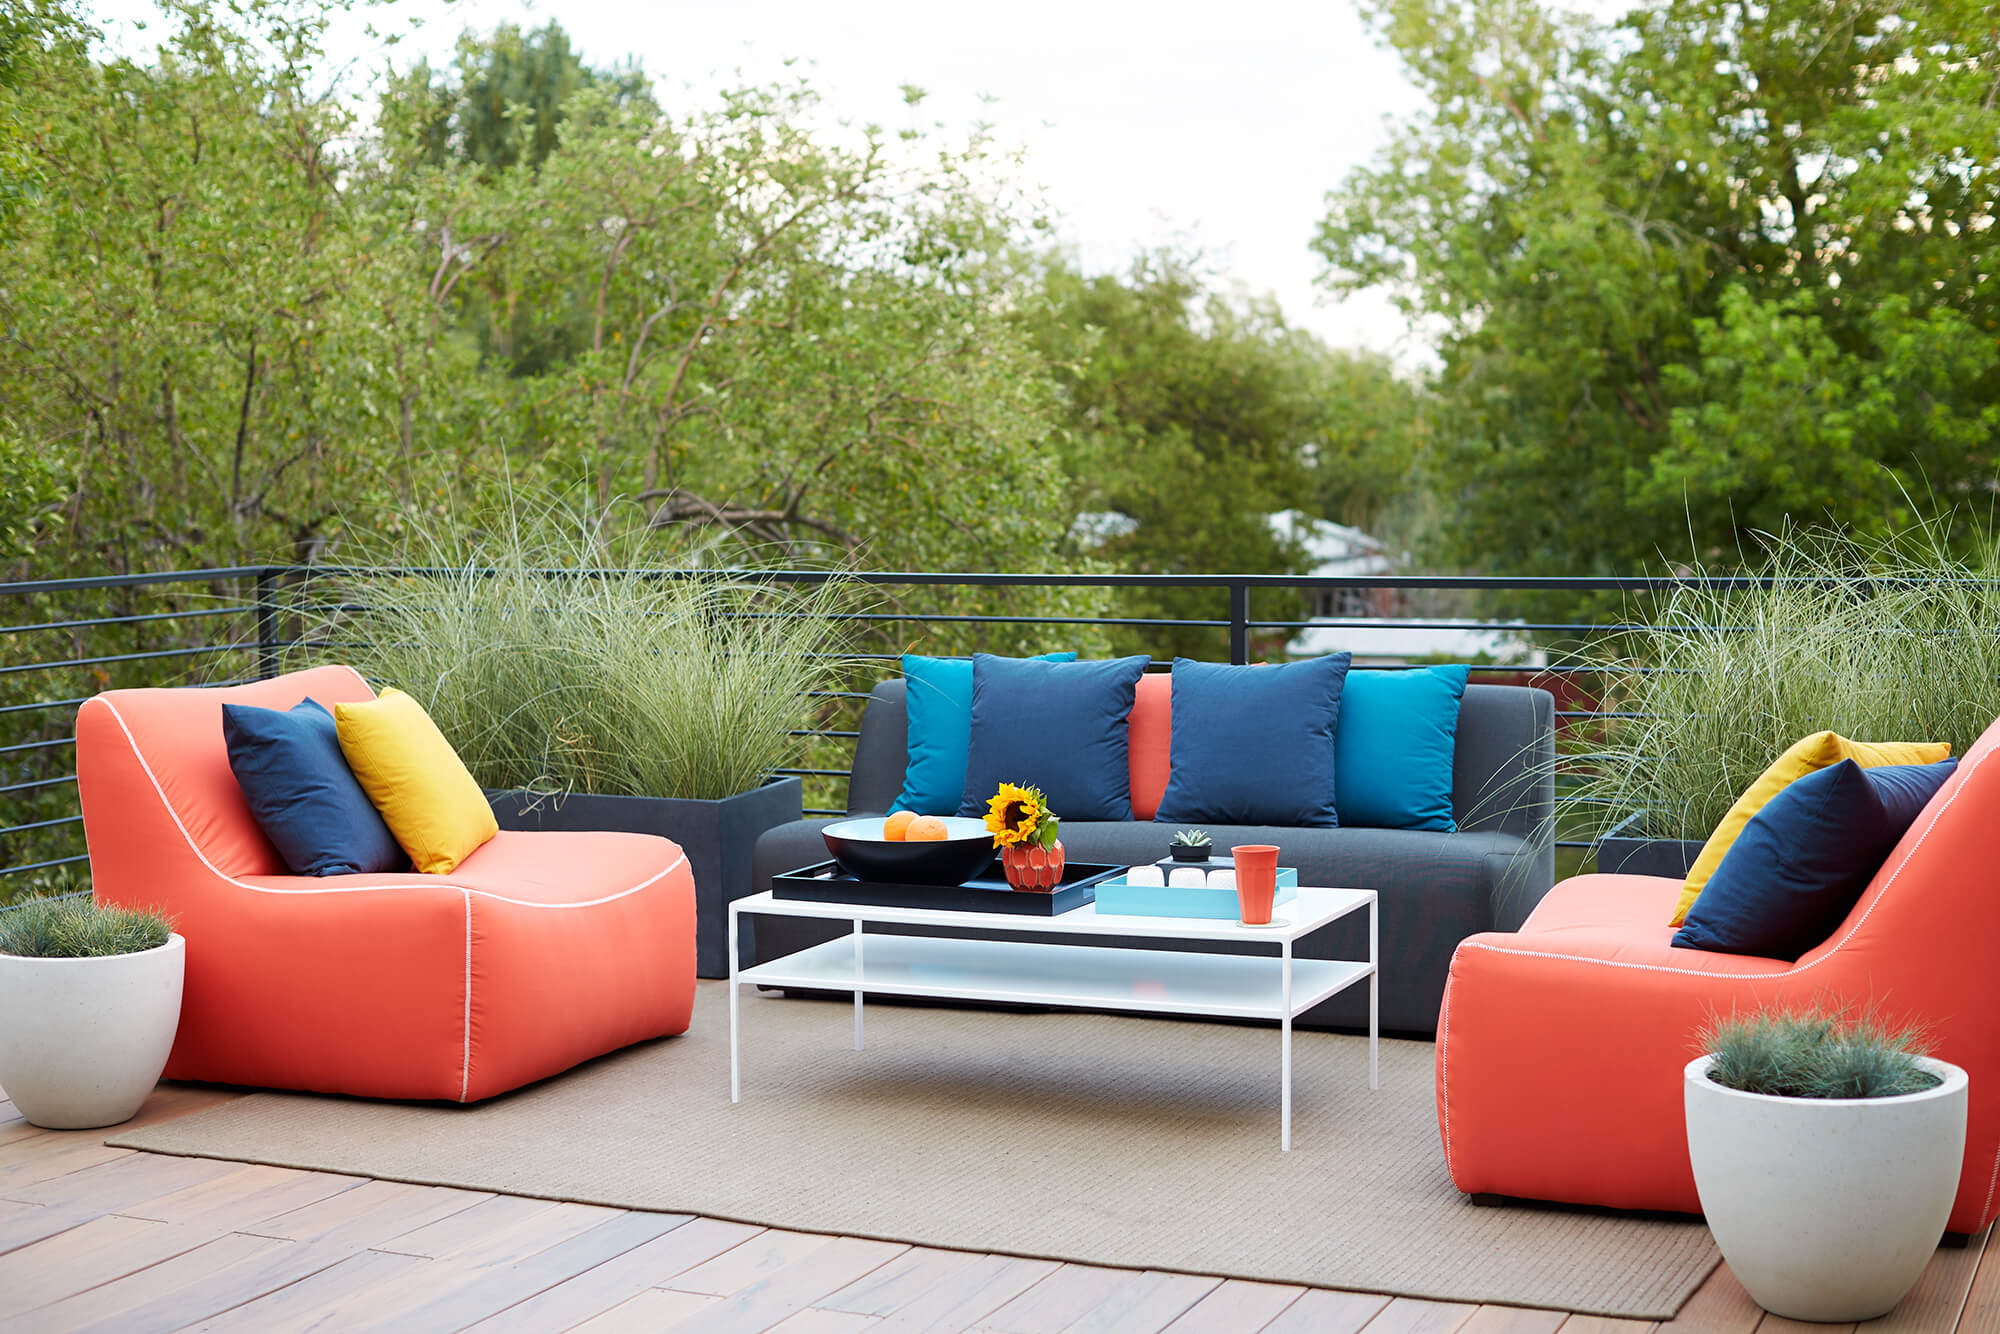 Fully Upholstered Outdoor Sofa Set, Lounge Sitting for Garden, Terrace & patio